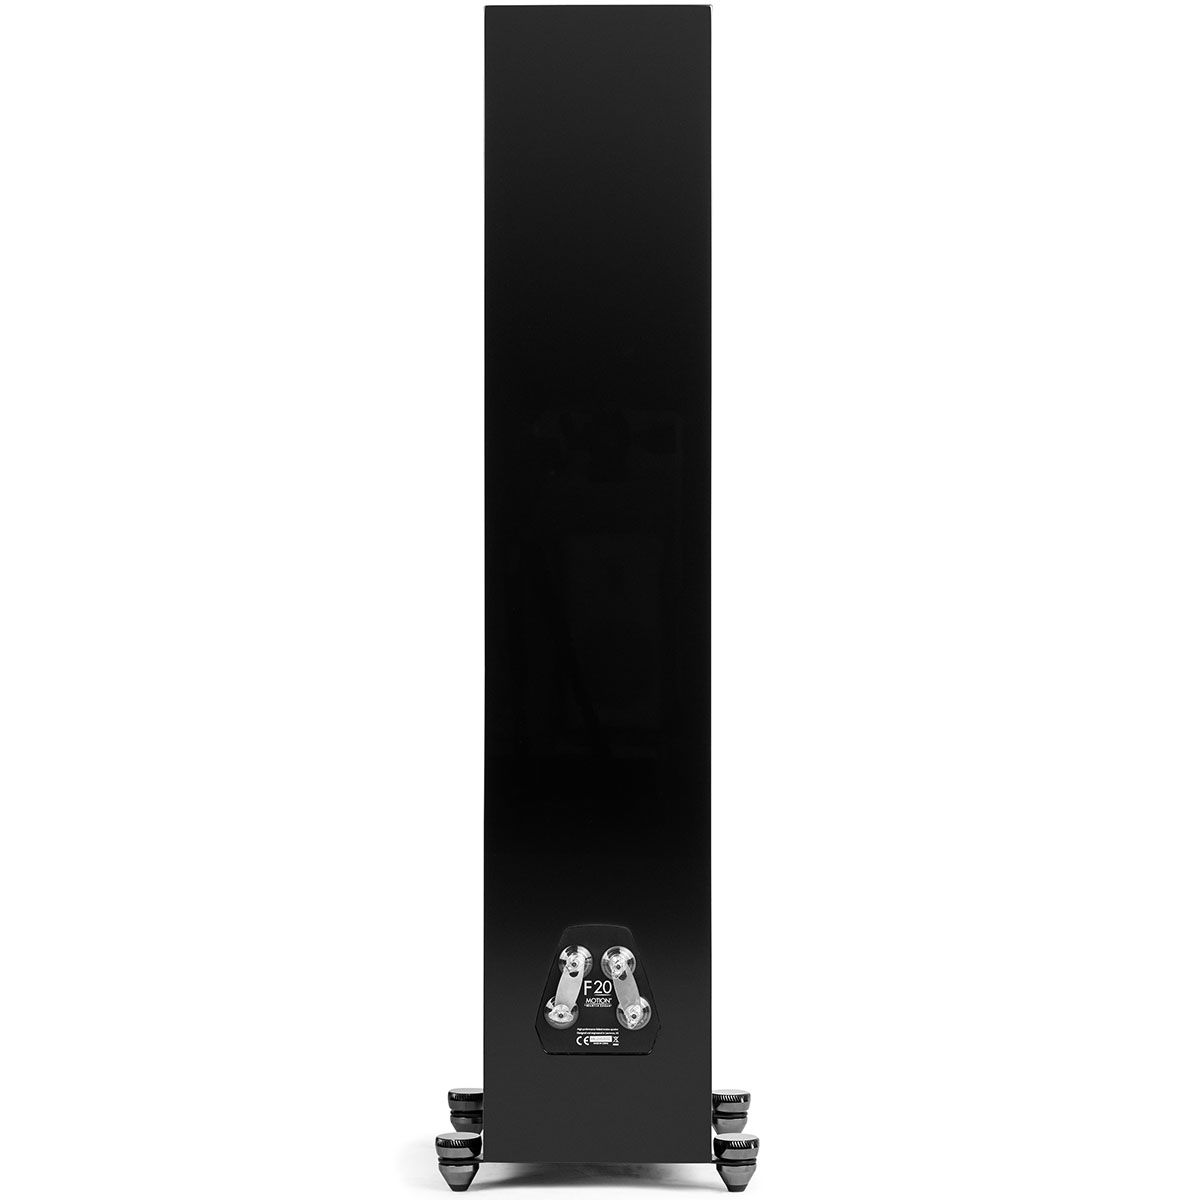 MartinLogan Motion XT F20  Floorstanding Speaker in black rear view without grilles on white background